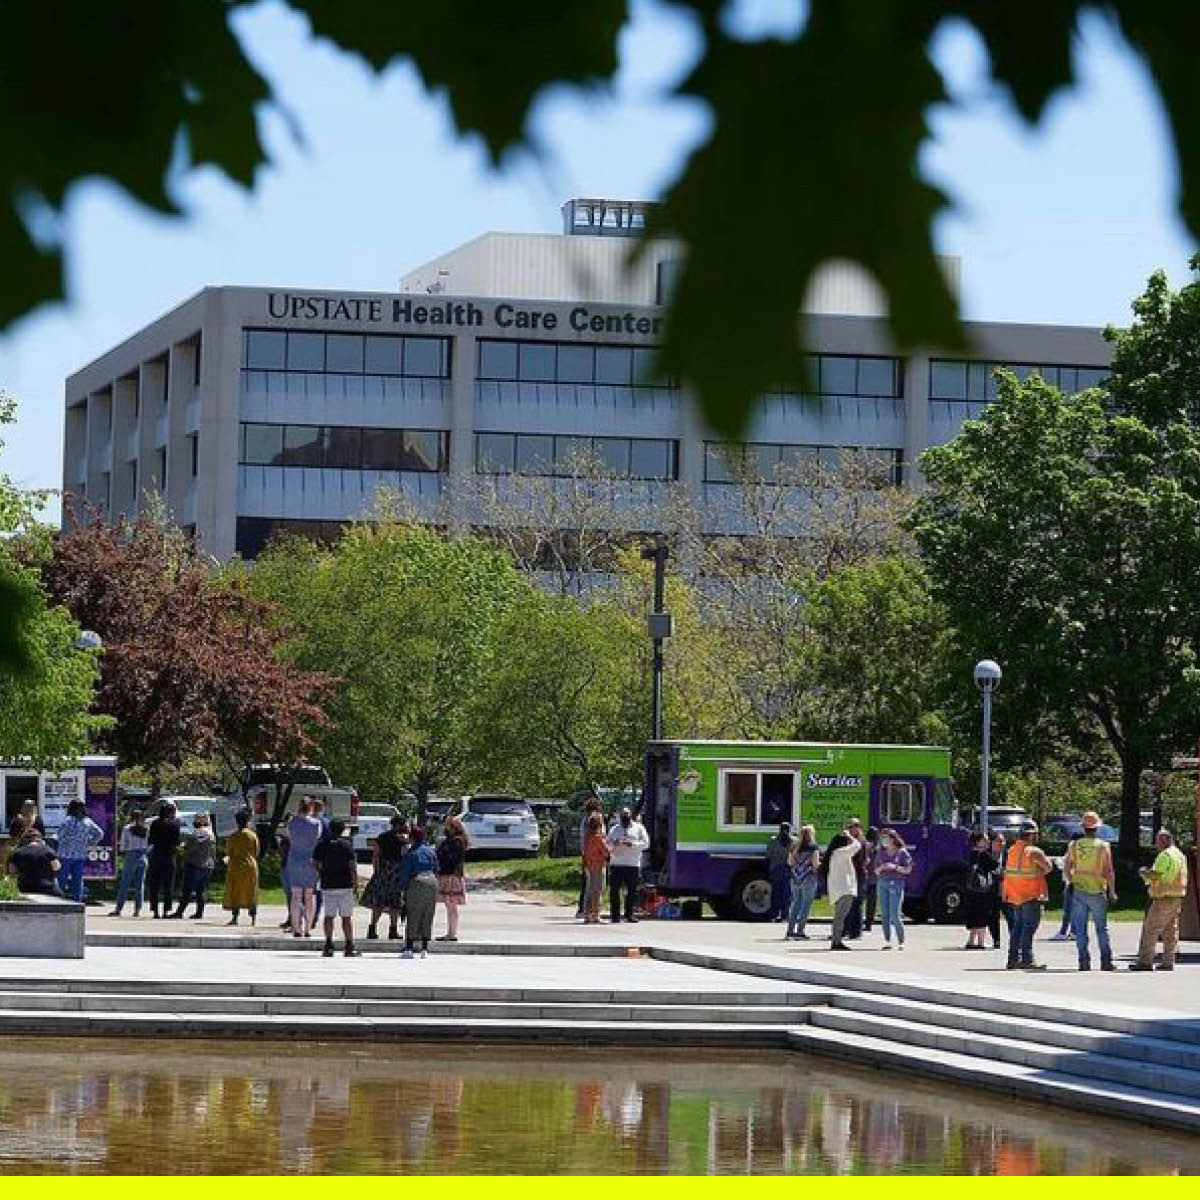 🍕Food Truck Fridays are back #AtTheE! Enjoy your lunch on the plaza from 11am-2pm every Friday through August 15th from a variety of delicious food trucks. Visit streetfoodfinder.com/eversonmuseum to order ahead from select trucks. Done in partnership with @syrfoodtrucks.